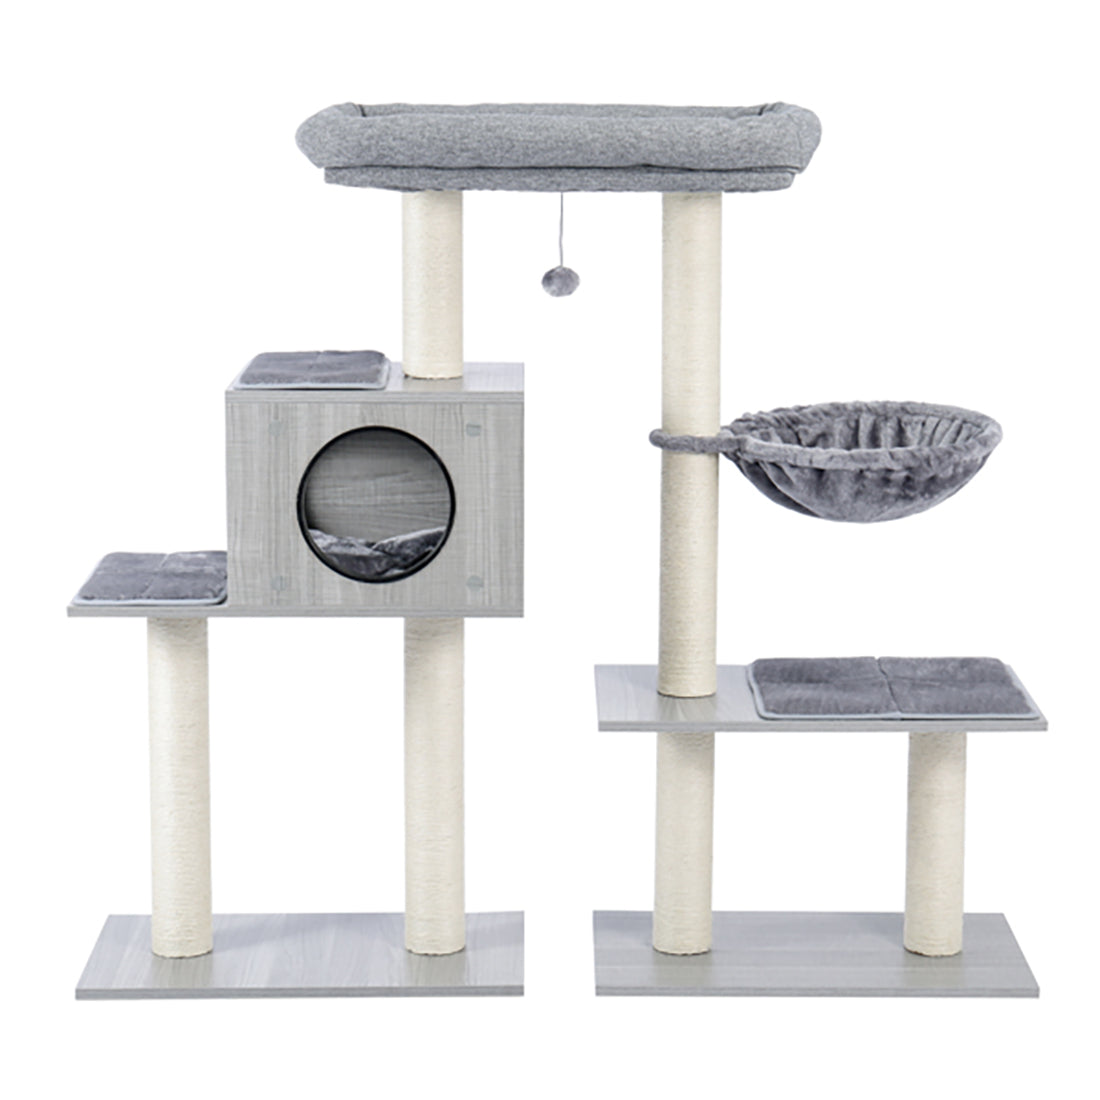 Nicewell Cat Tree Condo Cat Furniture Kitten Activity Tower Pet Kitty Play House with Cat Scratching Posts Perch Hammock Tunnel - Grey